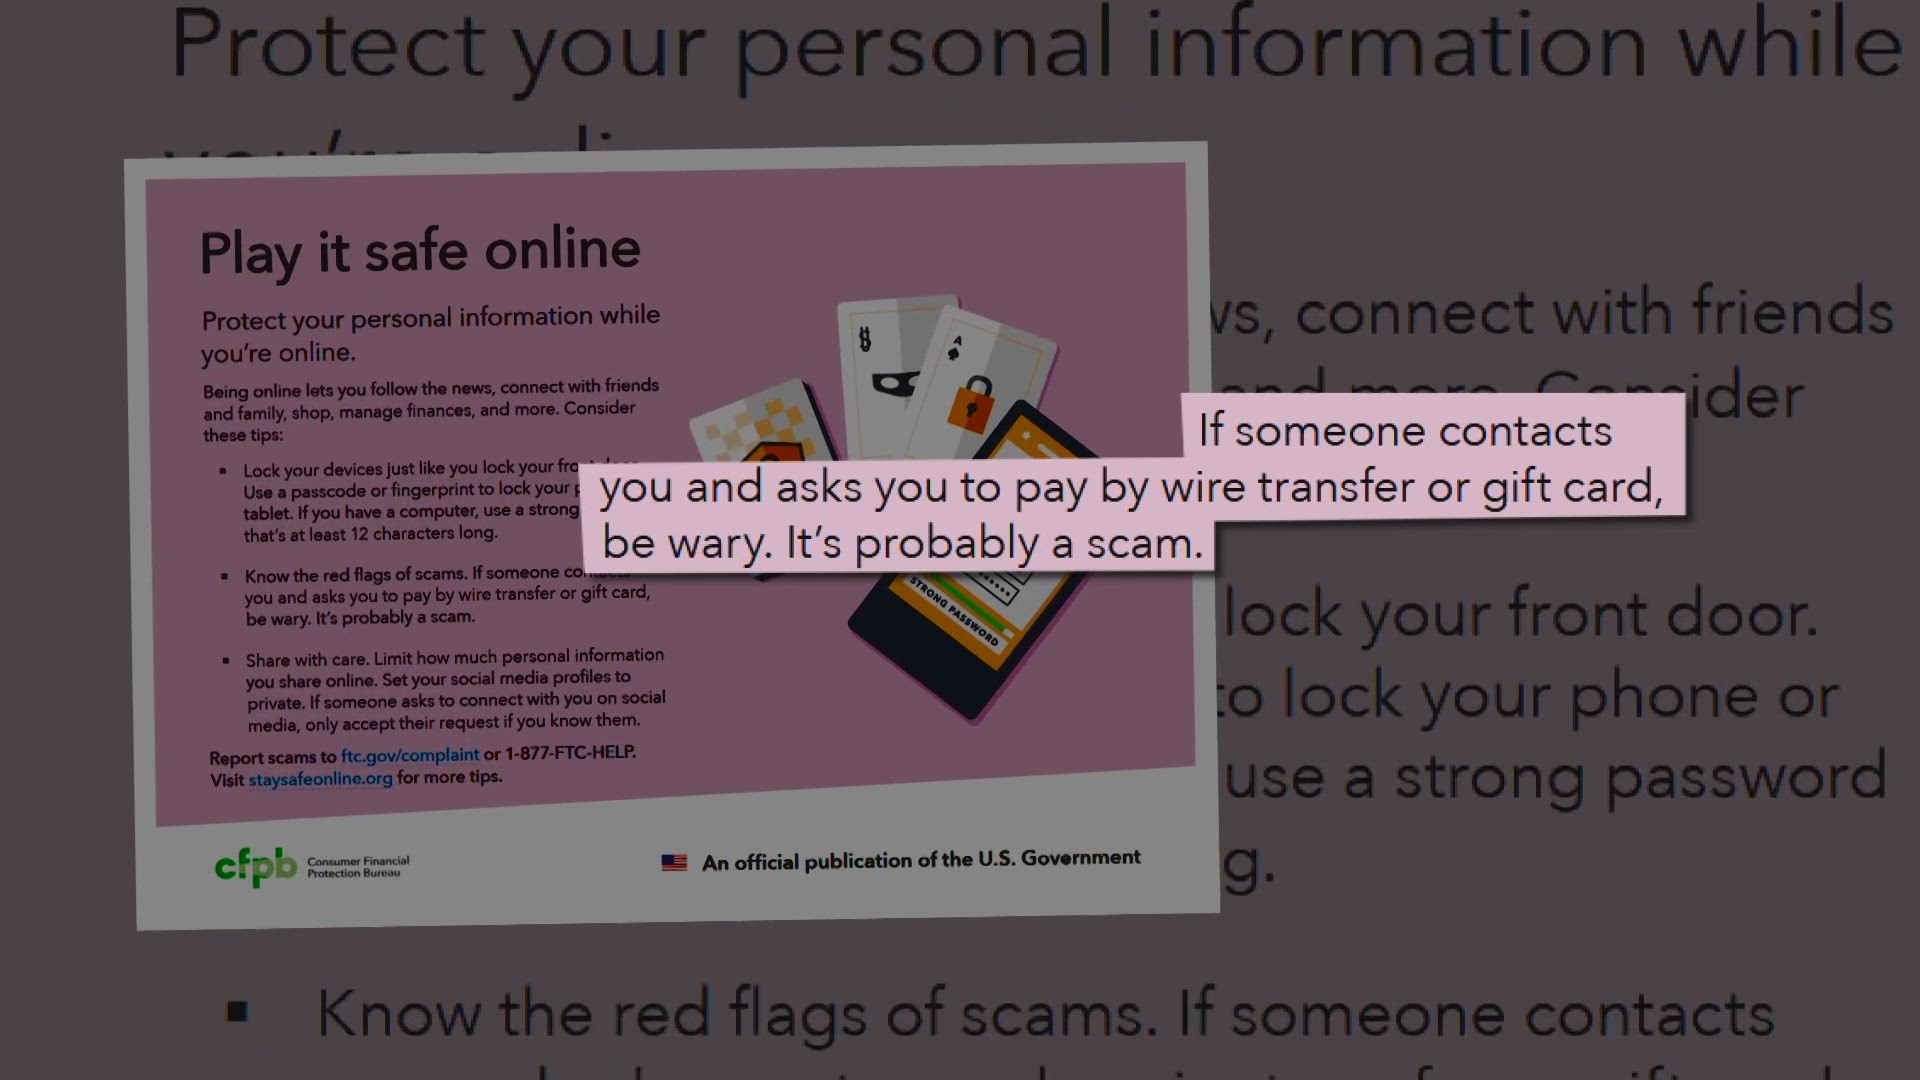 Free dinner placemats downloads designed by the Consumer Financial Protection Bureau offer a tool for protecting elderly loved ones by highlighting scam red flags.